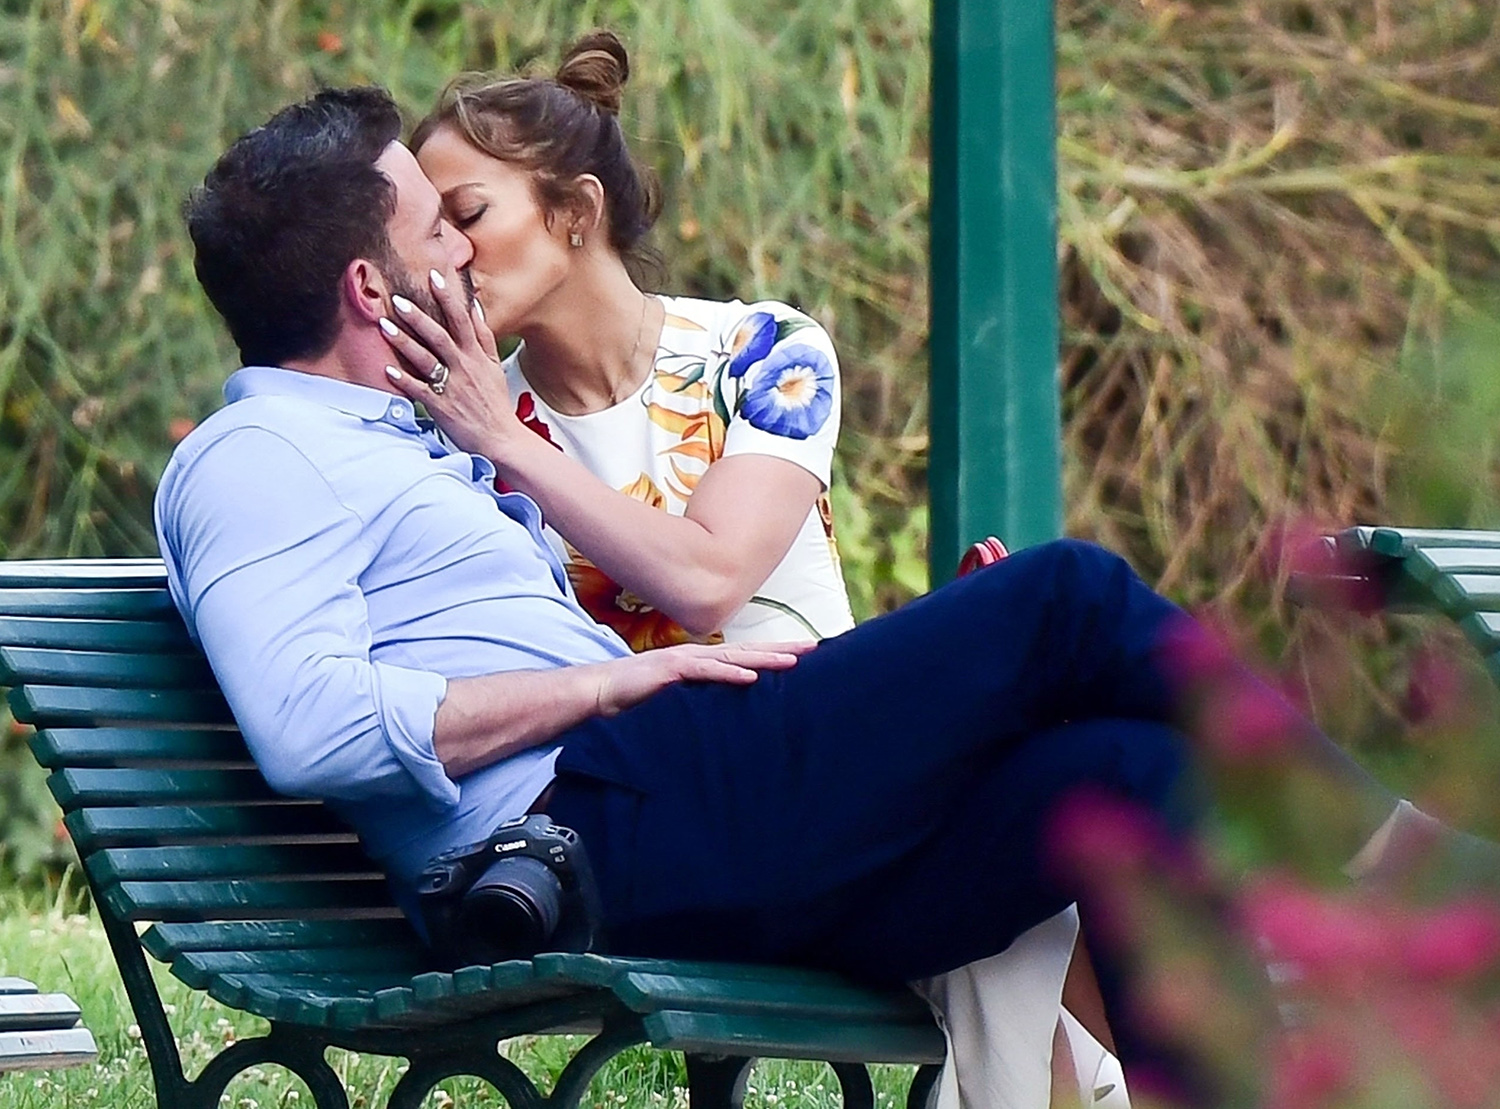 Jennifer Lopez and Ben Affleck Spotted Kissing in a Paris Park During Post-Wedding Getaway